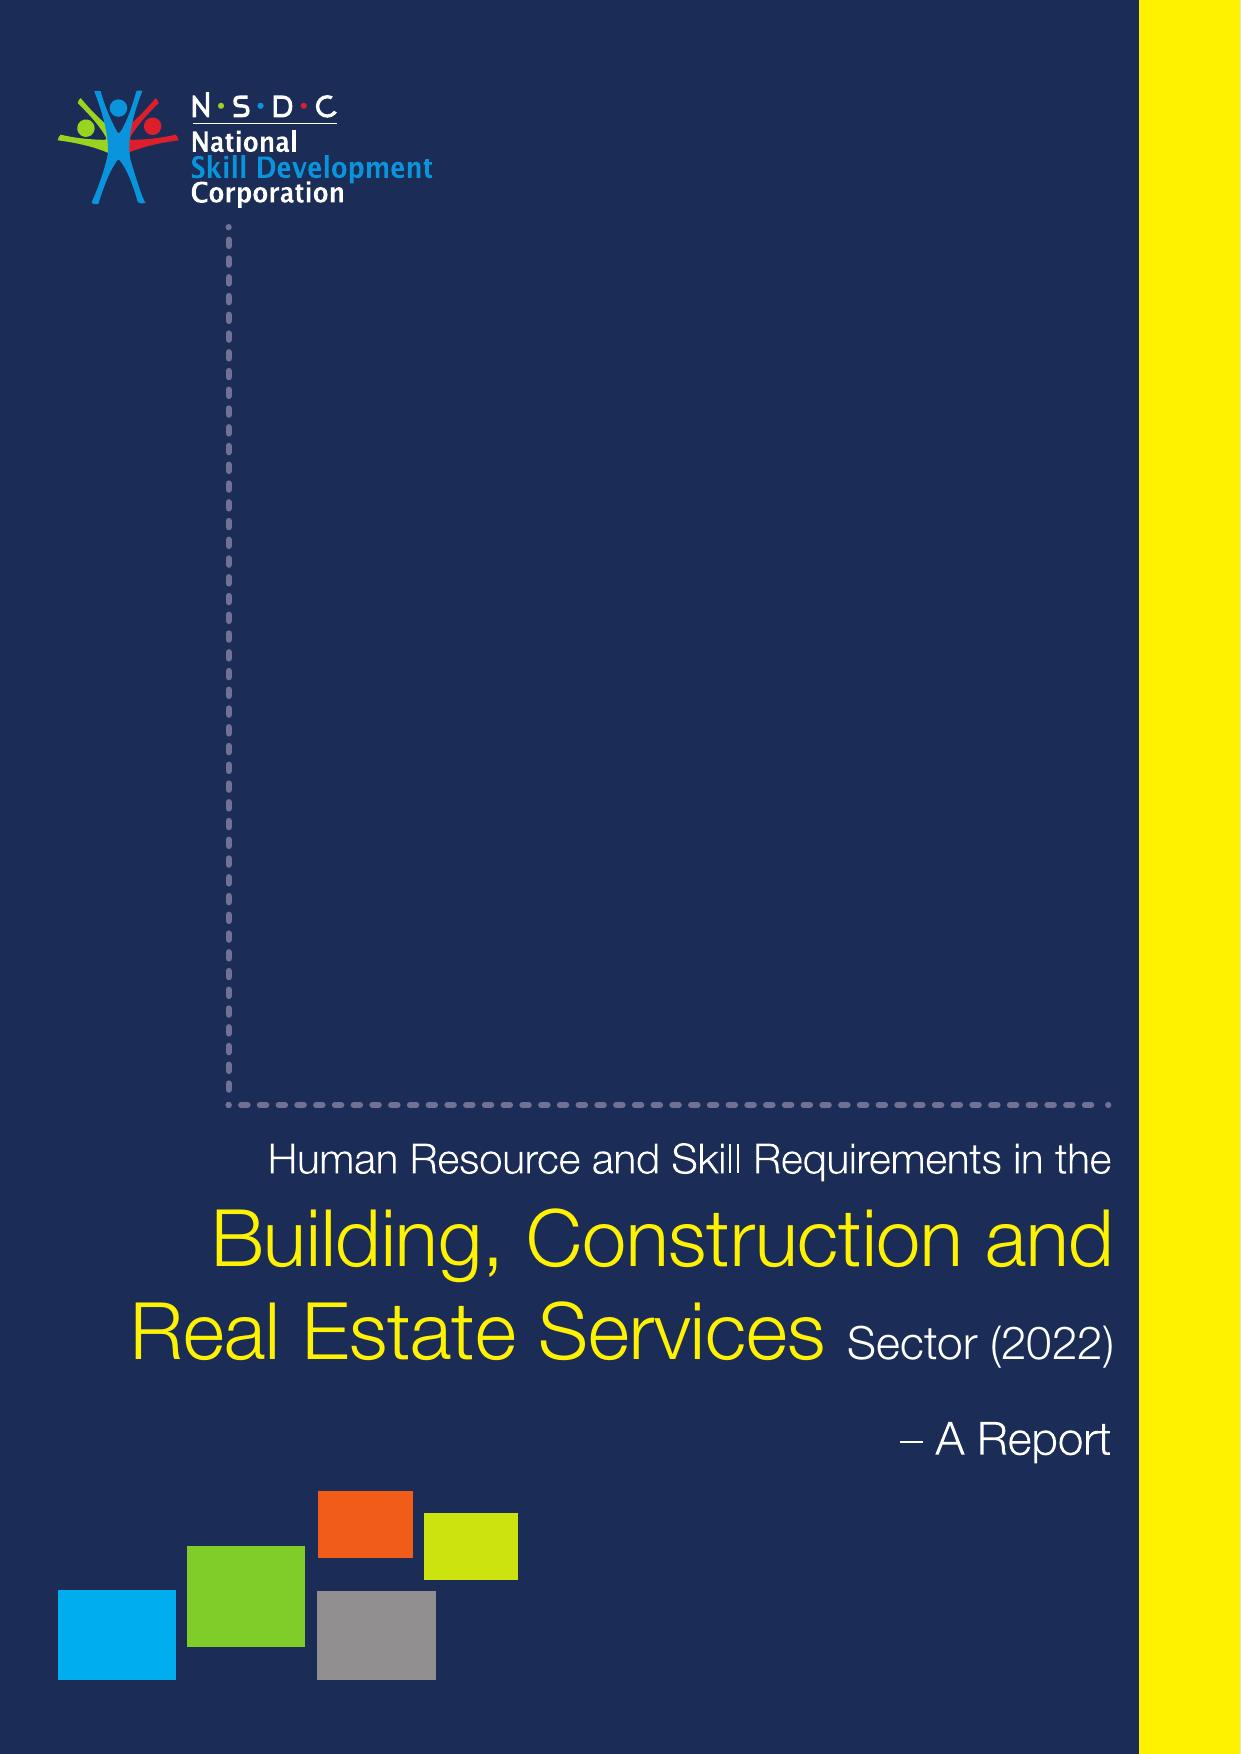 Skill Gap Analysis Report for Building, Construction and Real Estate Industry | Report on Human Resource and Skill Requirements in Building, Construction and Real Estate Sector